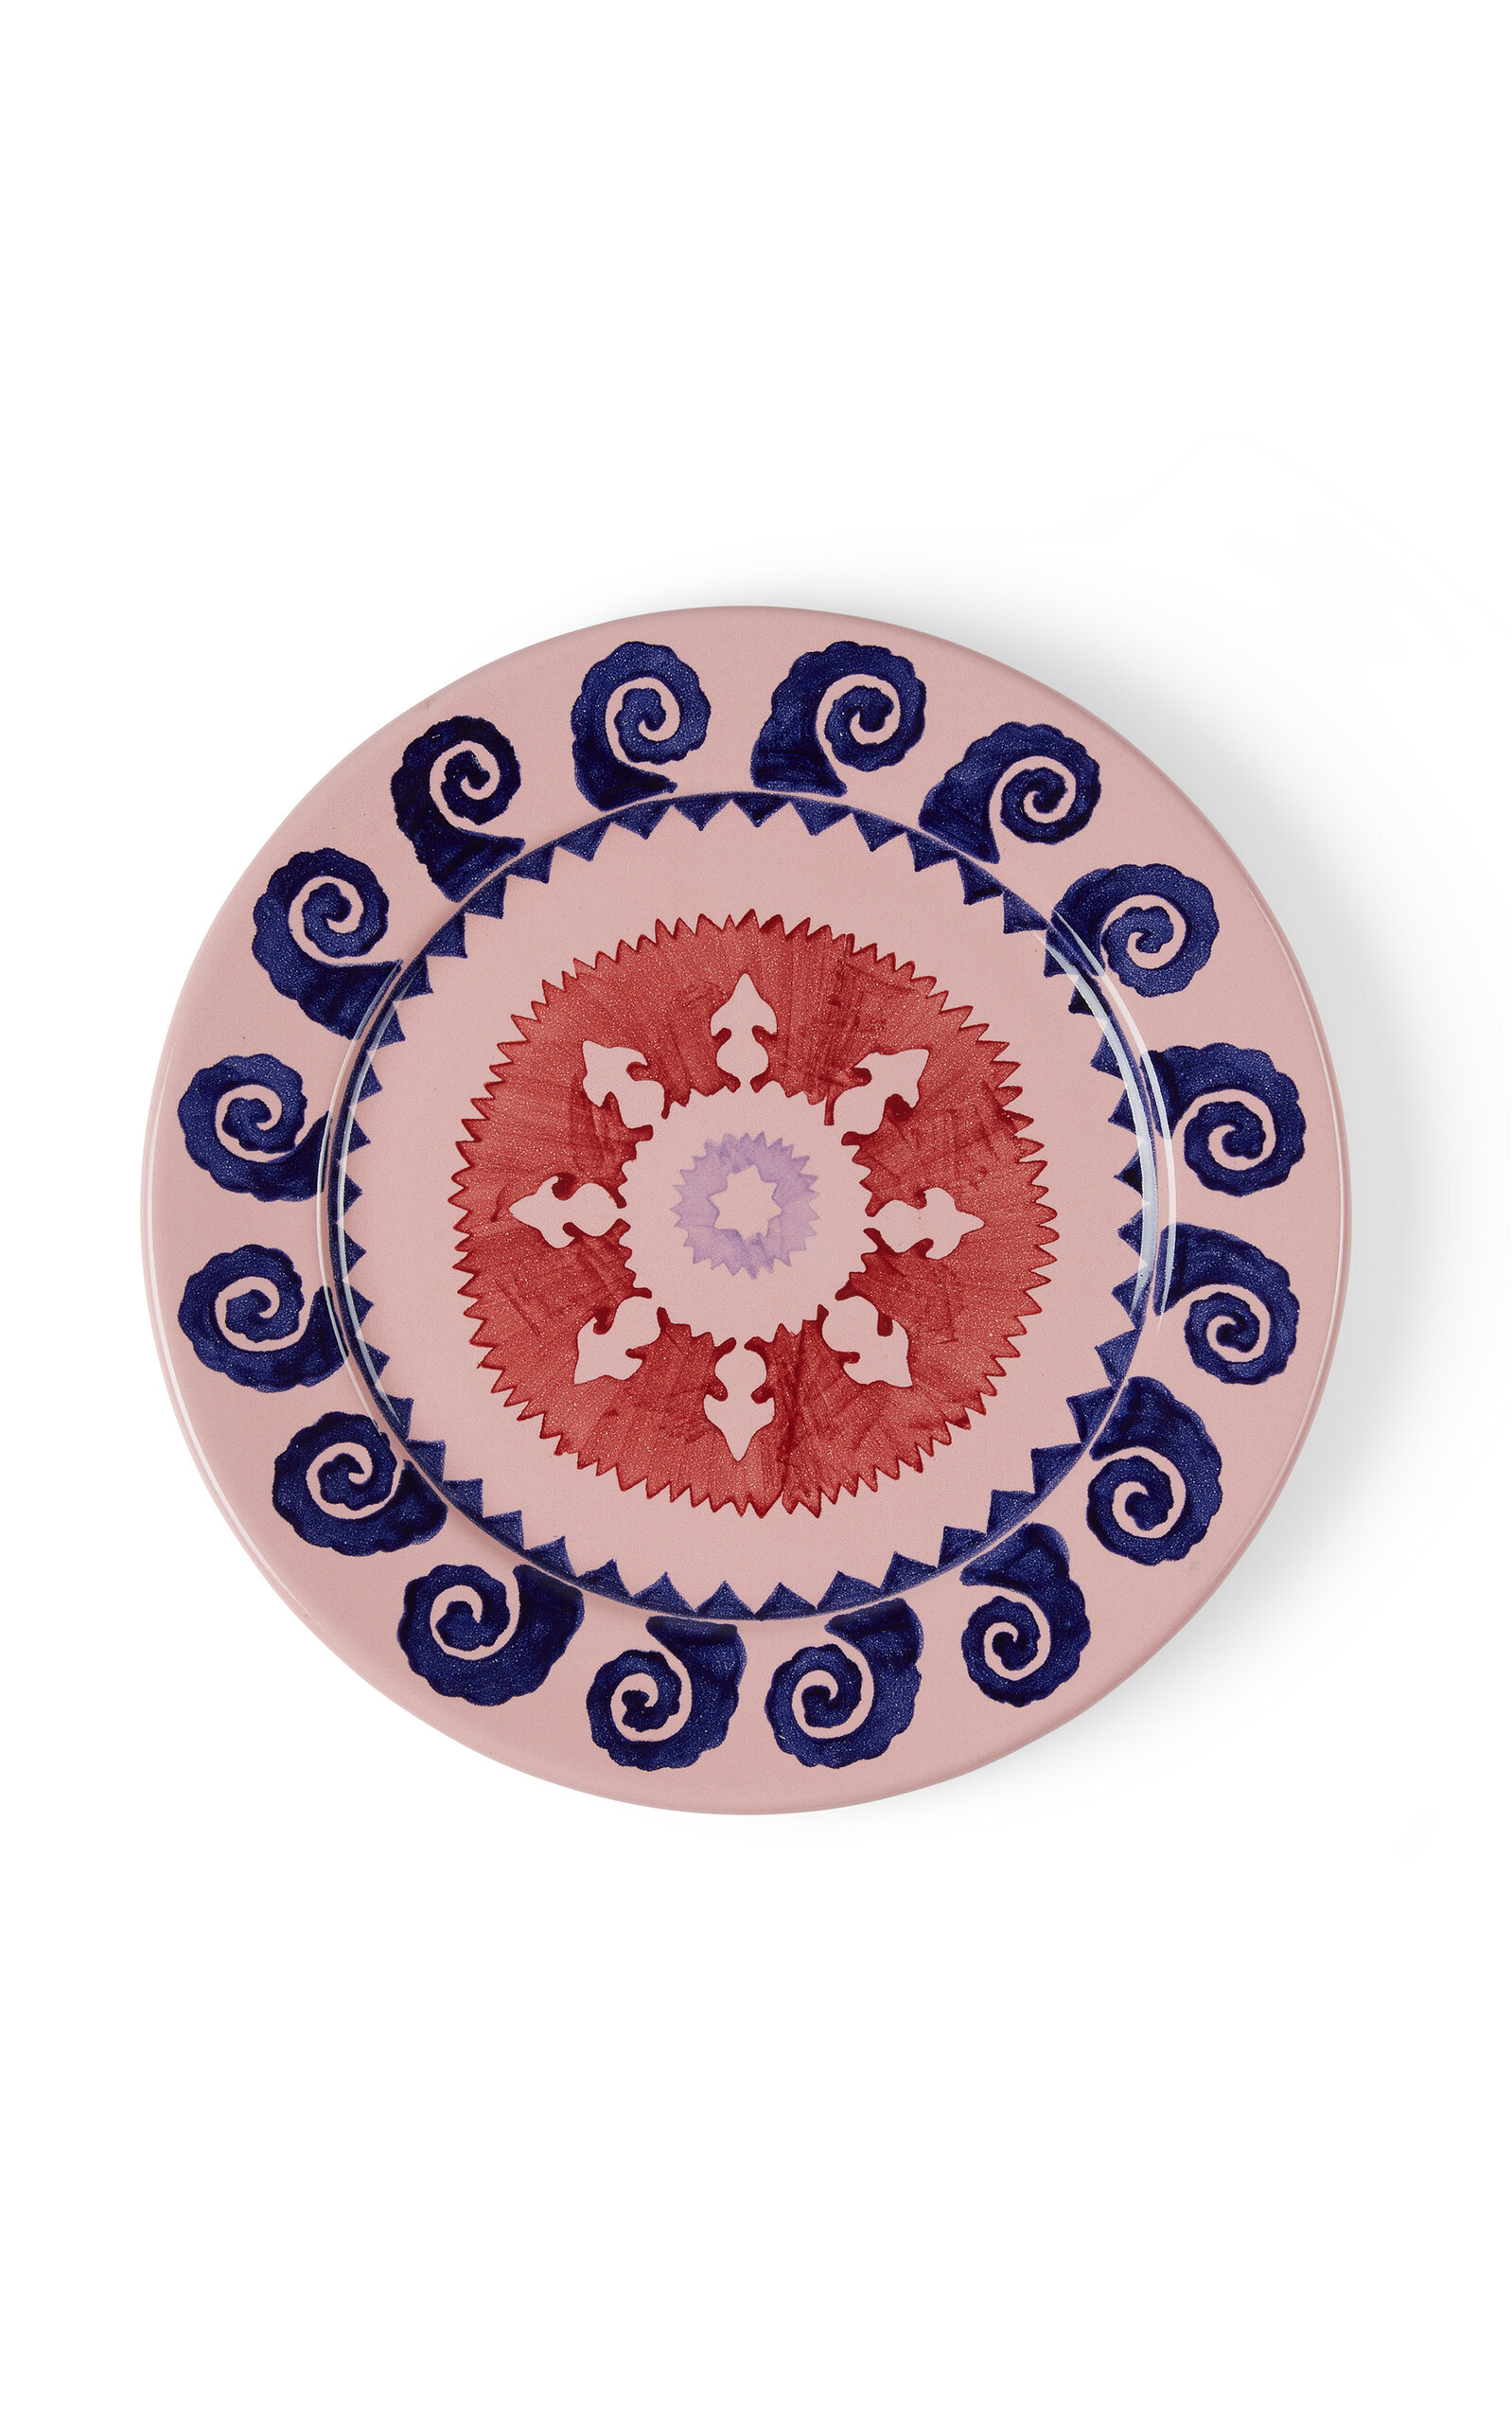 Emporio Sirenuse Sun Charger Plate In Red